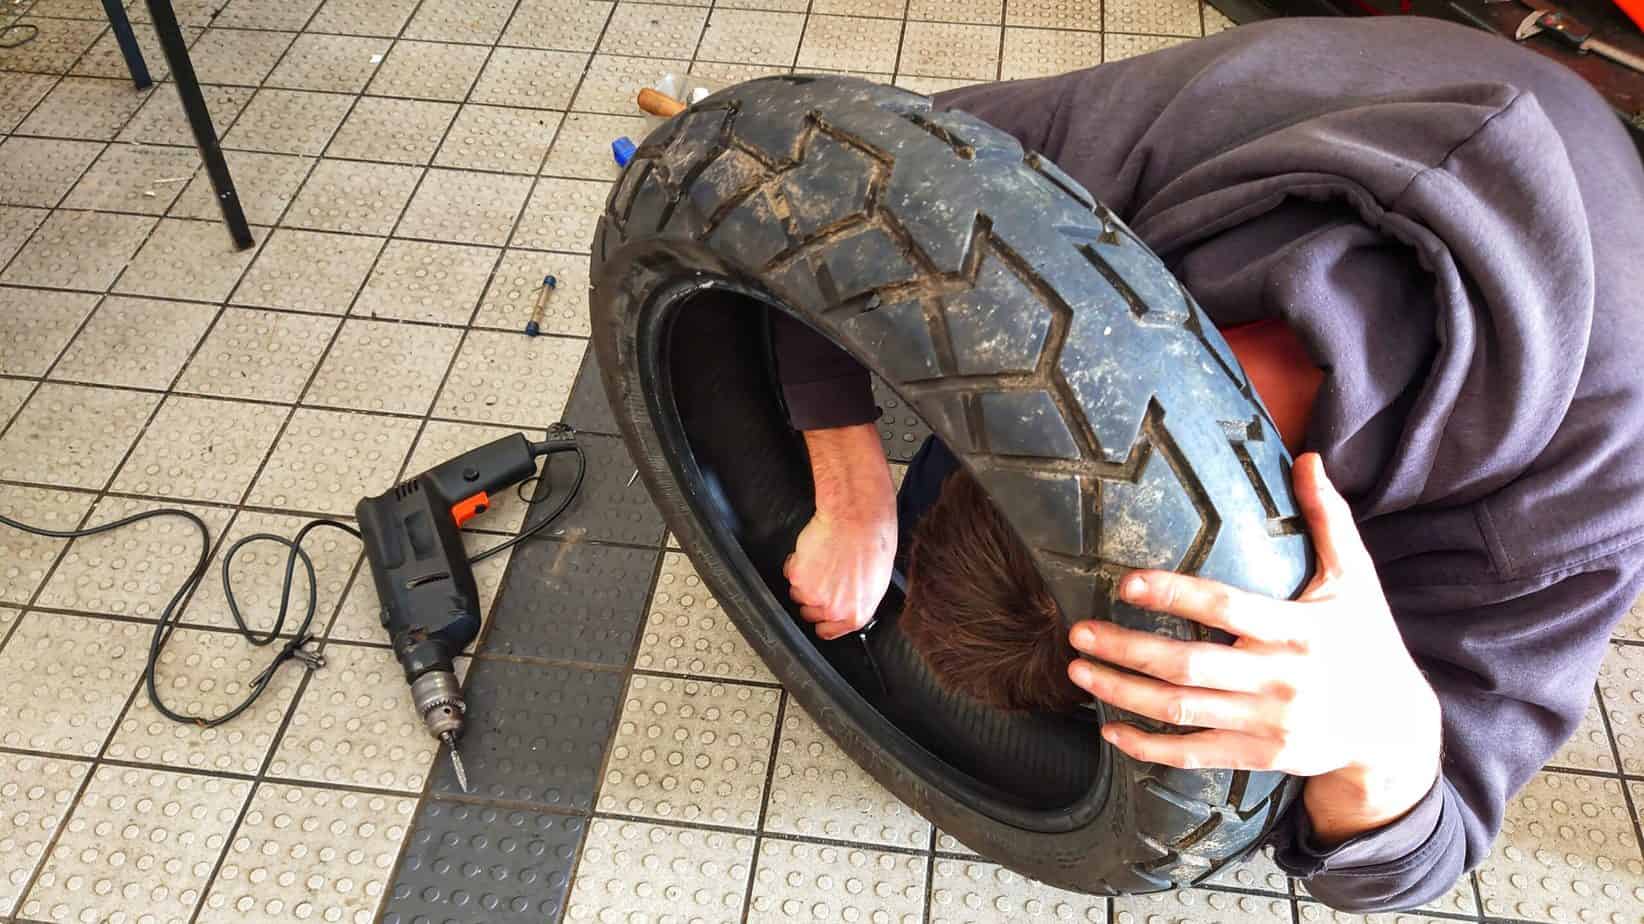 Man fixing motorcycle tire, puncher repair on motorcycle tire, motorcycle tire, Dunlop off-road tire